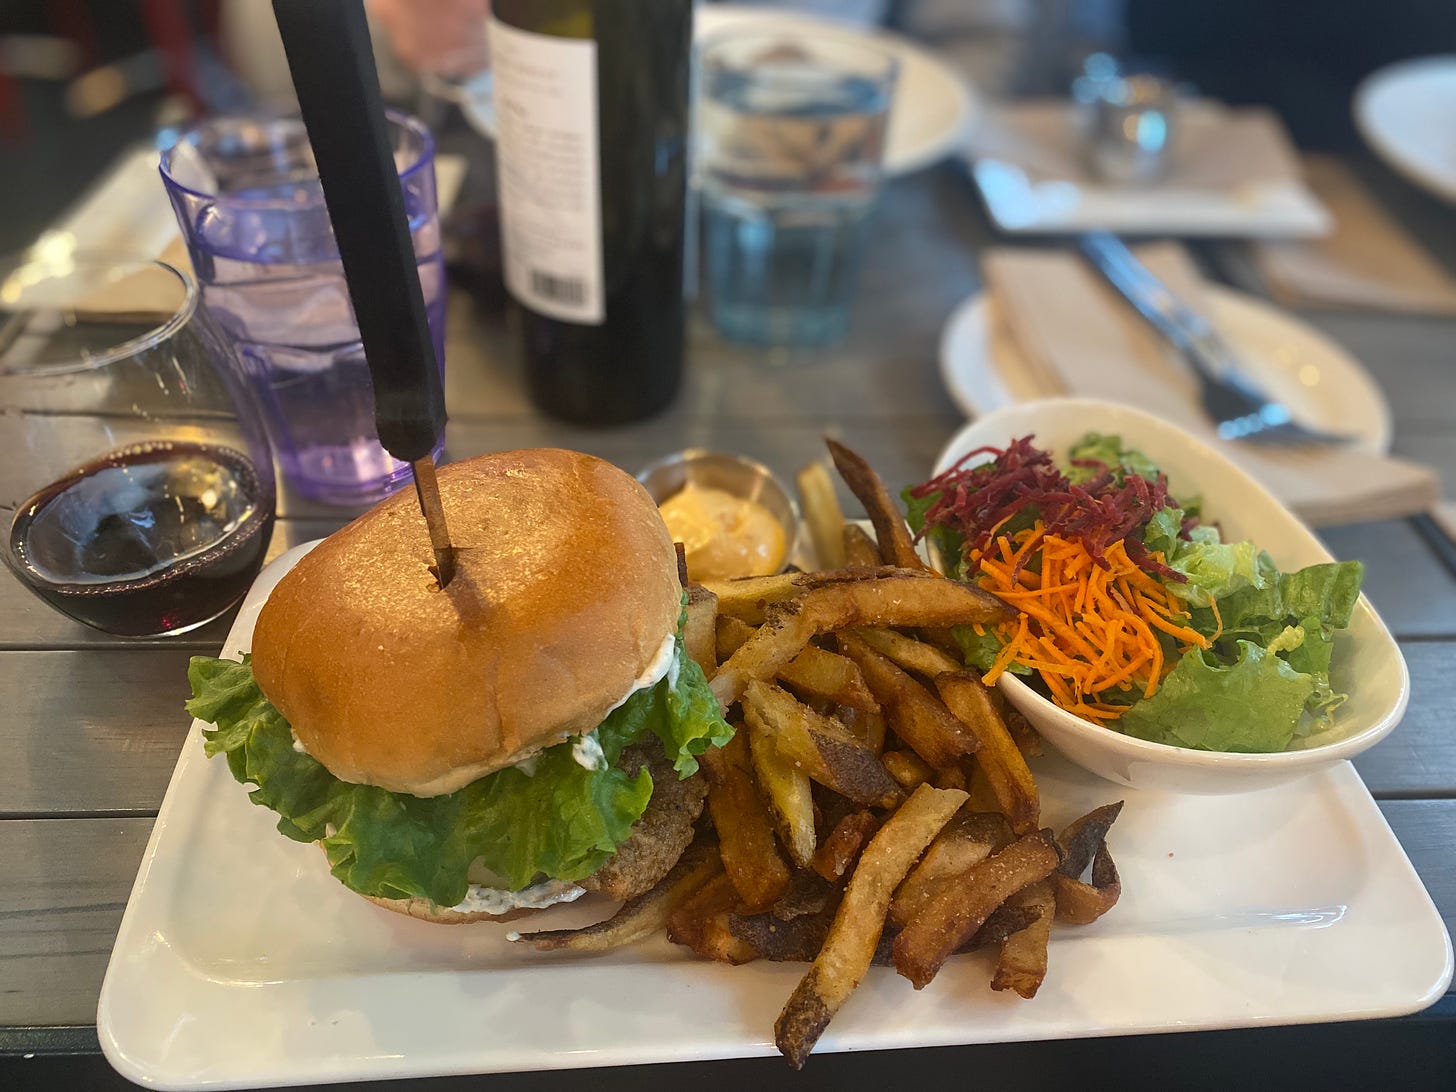 A rectangular plate with a fried oyster mushroom burger, fries, and salad with shredded beet and carrot. A knife is stabbed through the centre of the burger, and there's a glass of wine and a glass of water beside the plate. In the background you can see a wine bottle and a plate across the table.